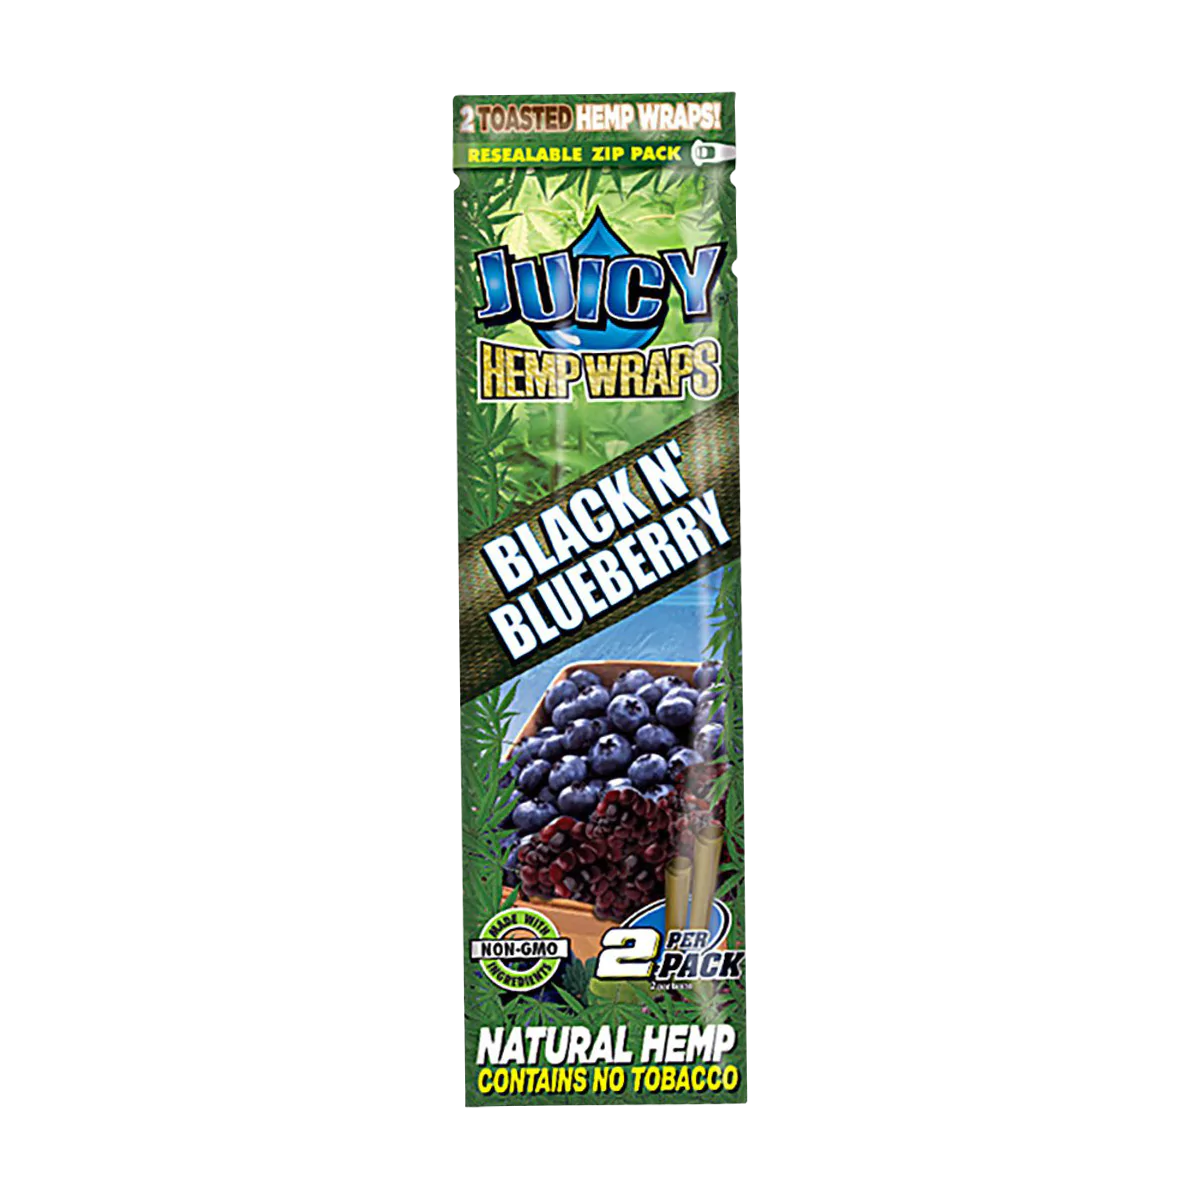 Juicy Jays Hemp Wraps 25 Pack, Black N' Blueberry flavor, front view on white background